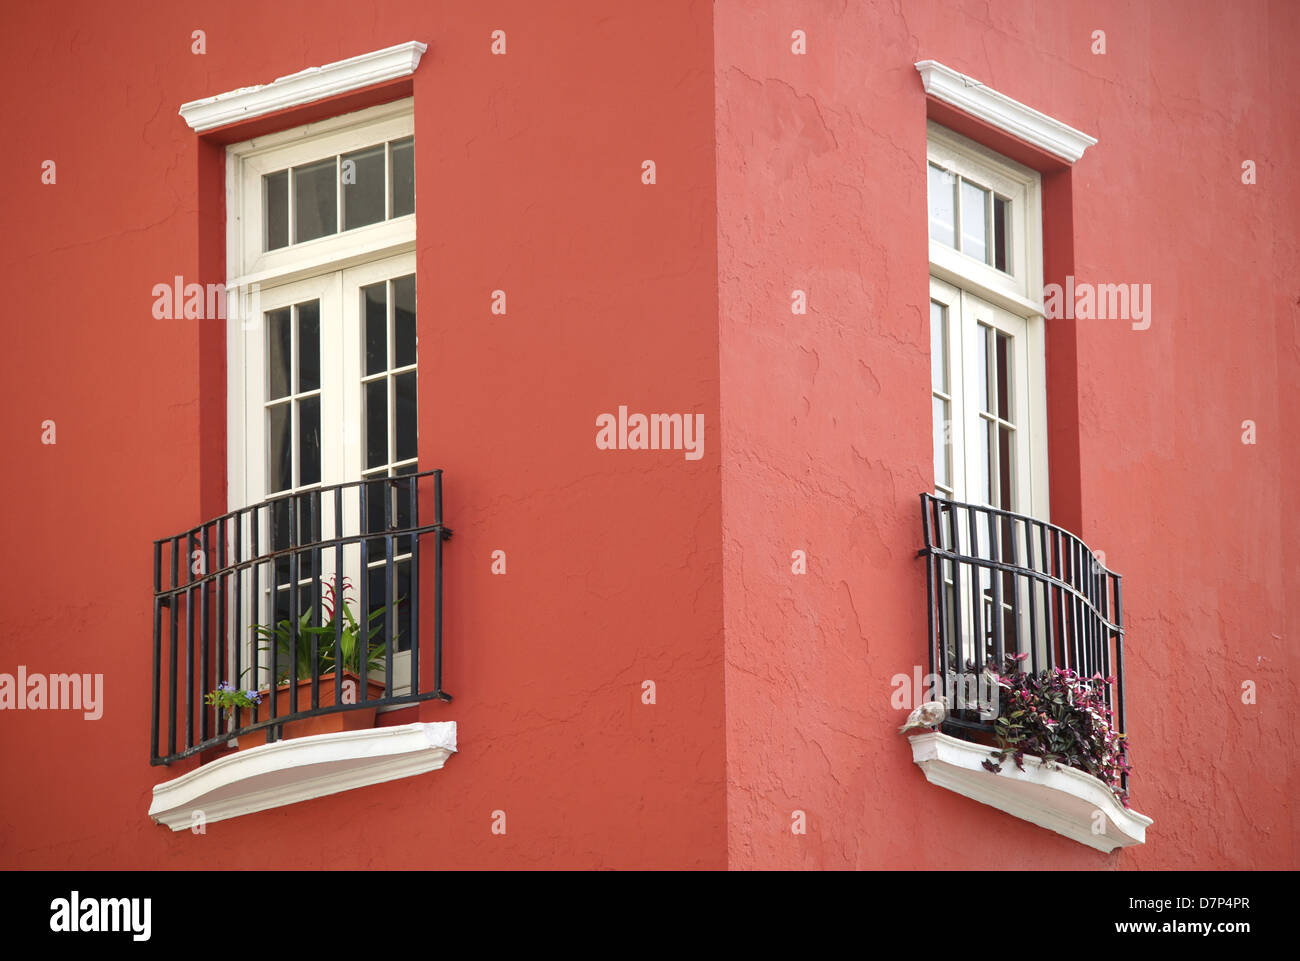 Architecture detail: Old worn white windows a red stucco building. Corner of the building. Located in San Juan, Puerto Rico. Stock Photo